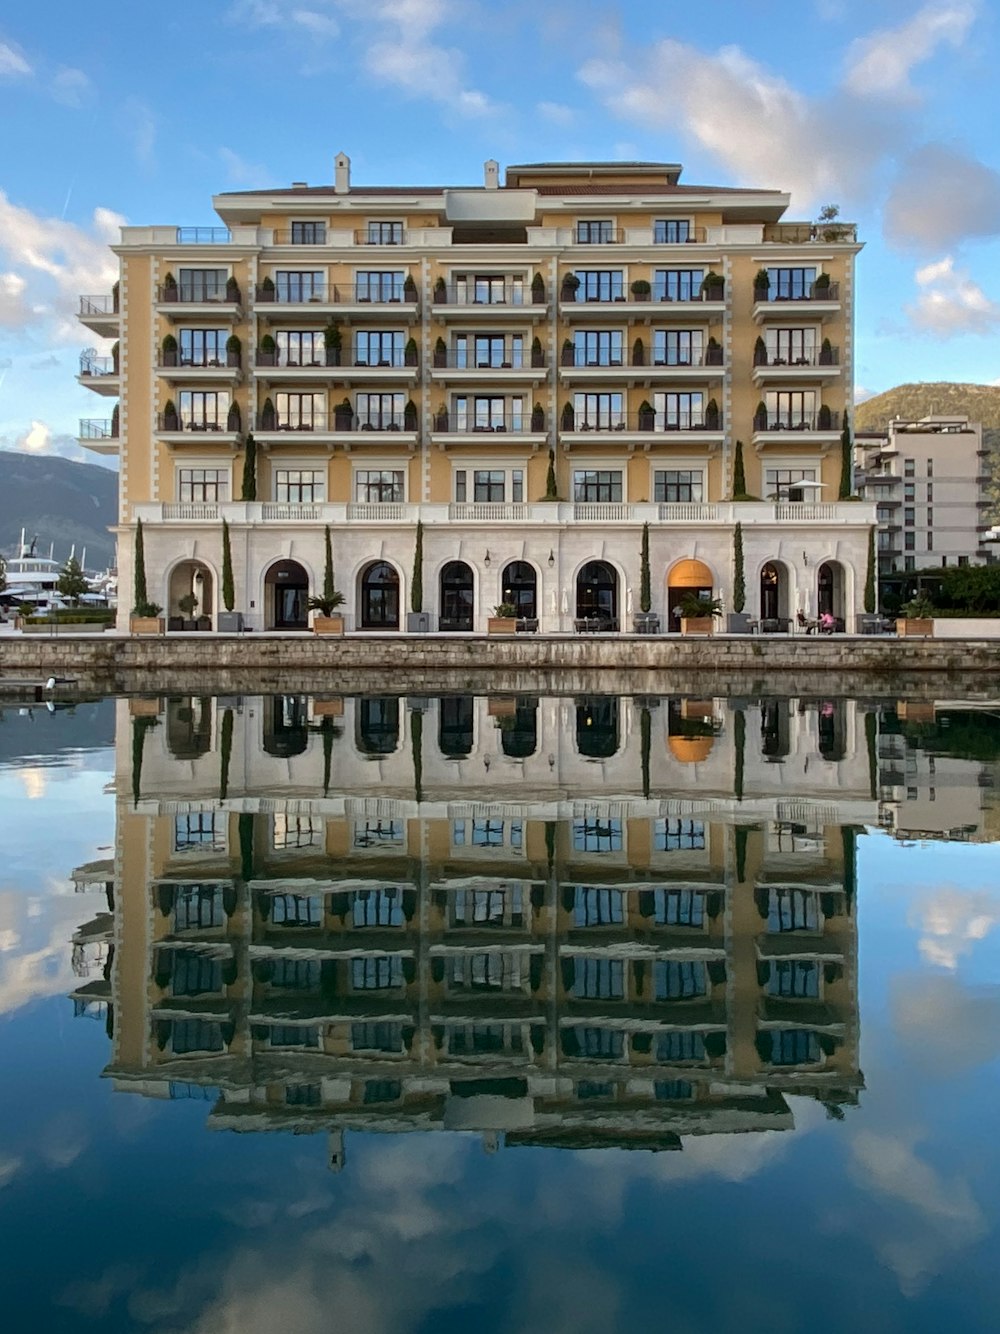 a large building sitting next to a body of water